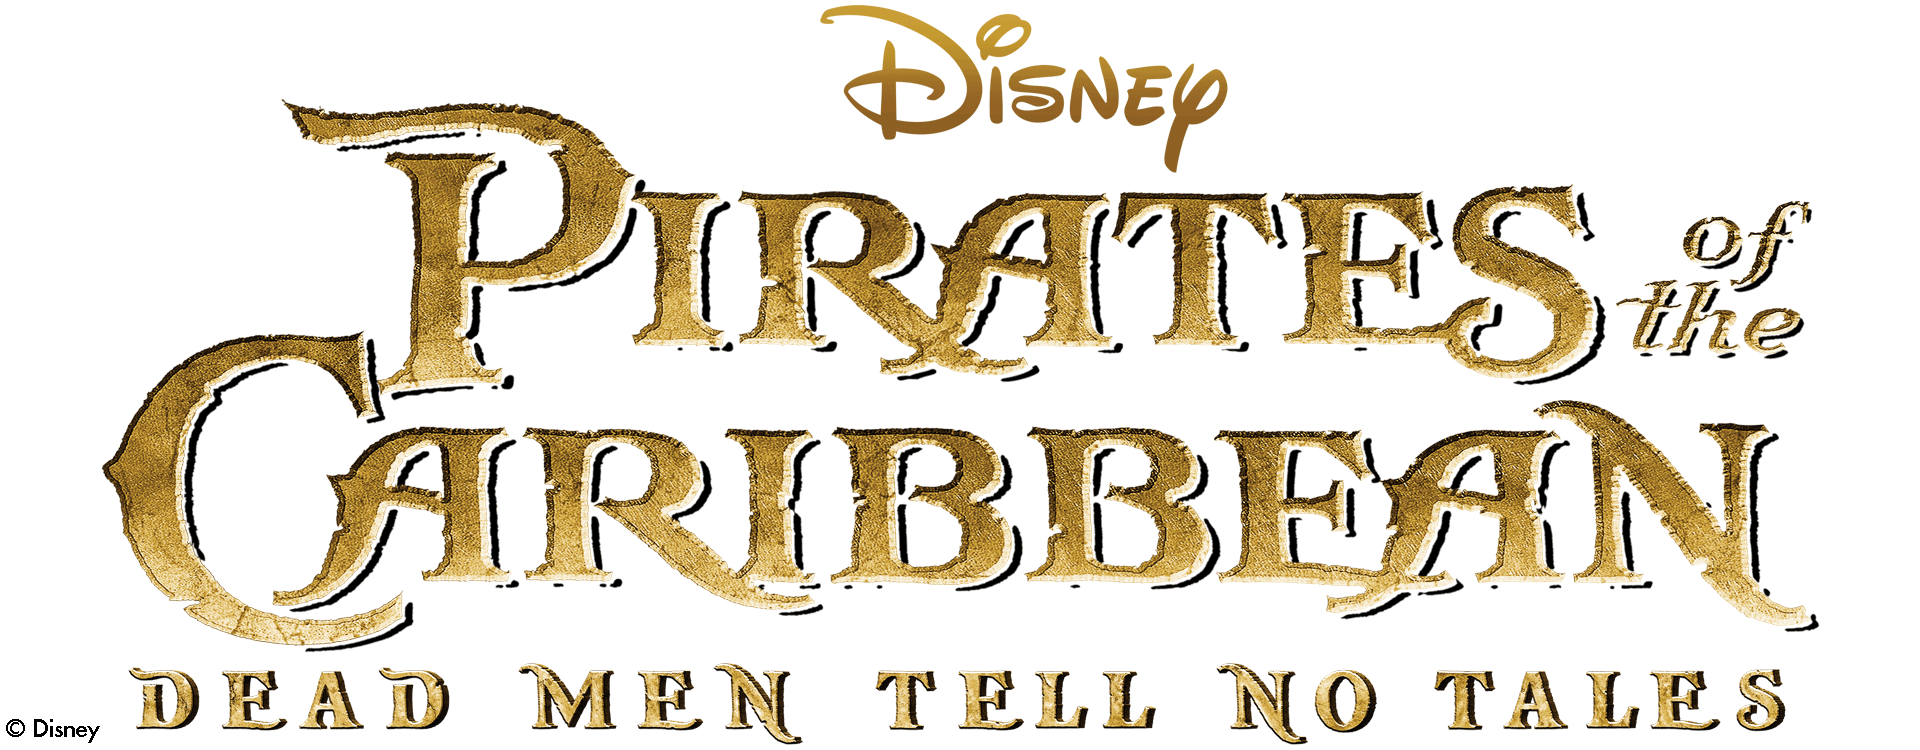 Pirates of The Caribbean PNG Background Image